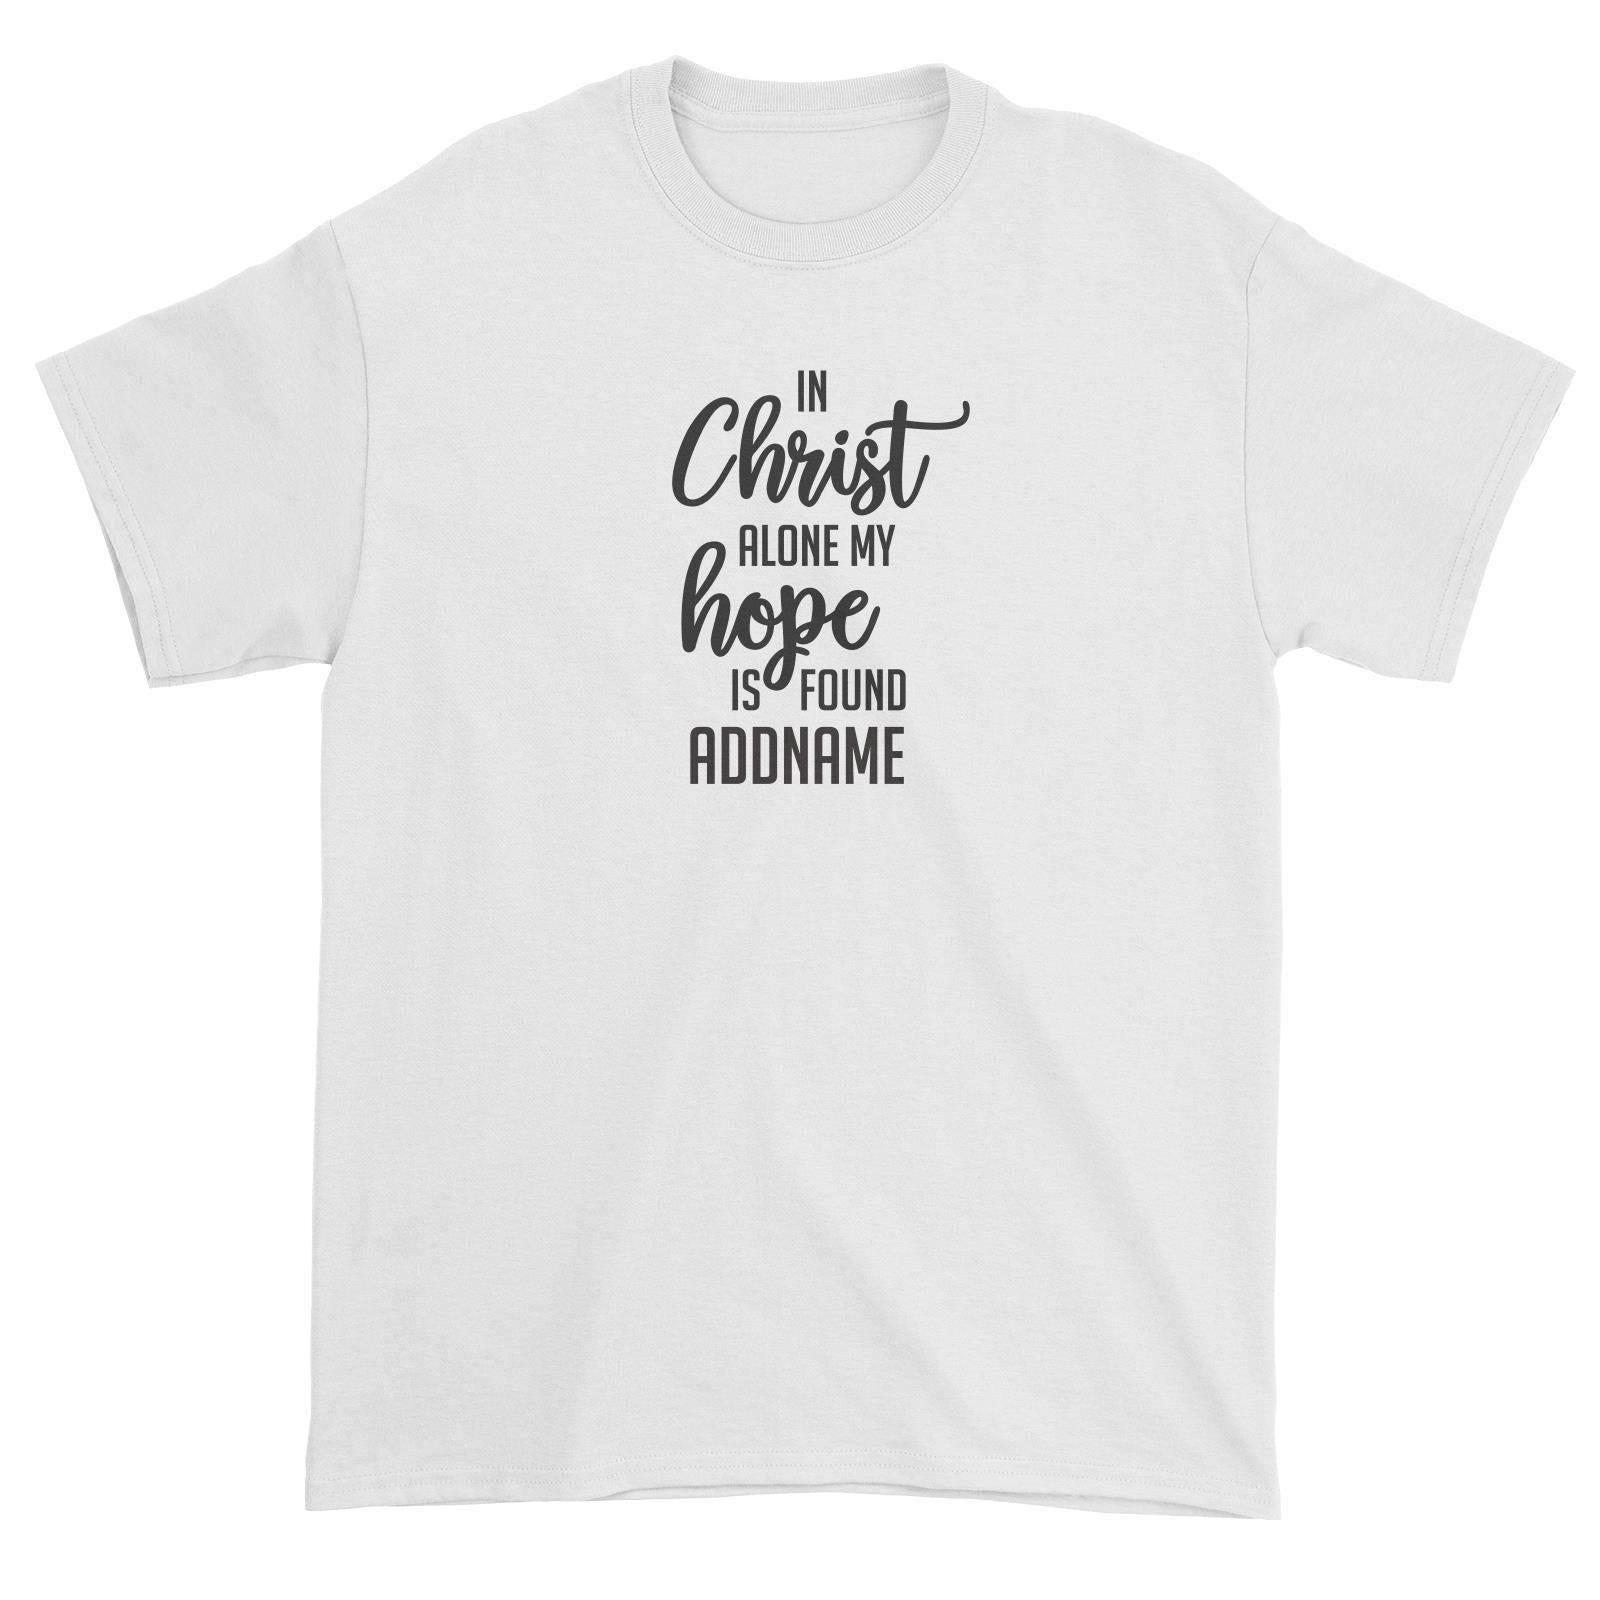 Christian Series In Christ Alone My Hope Is Found Addname Unisex T-Shirt